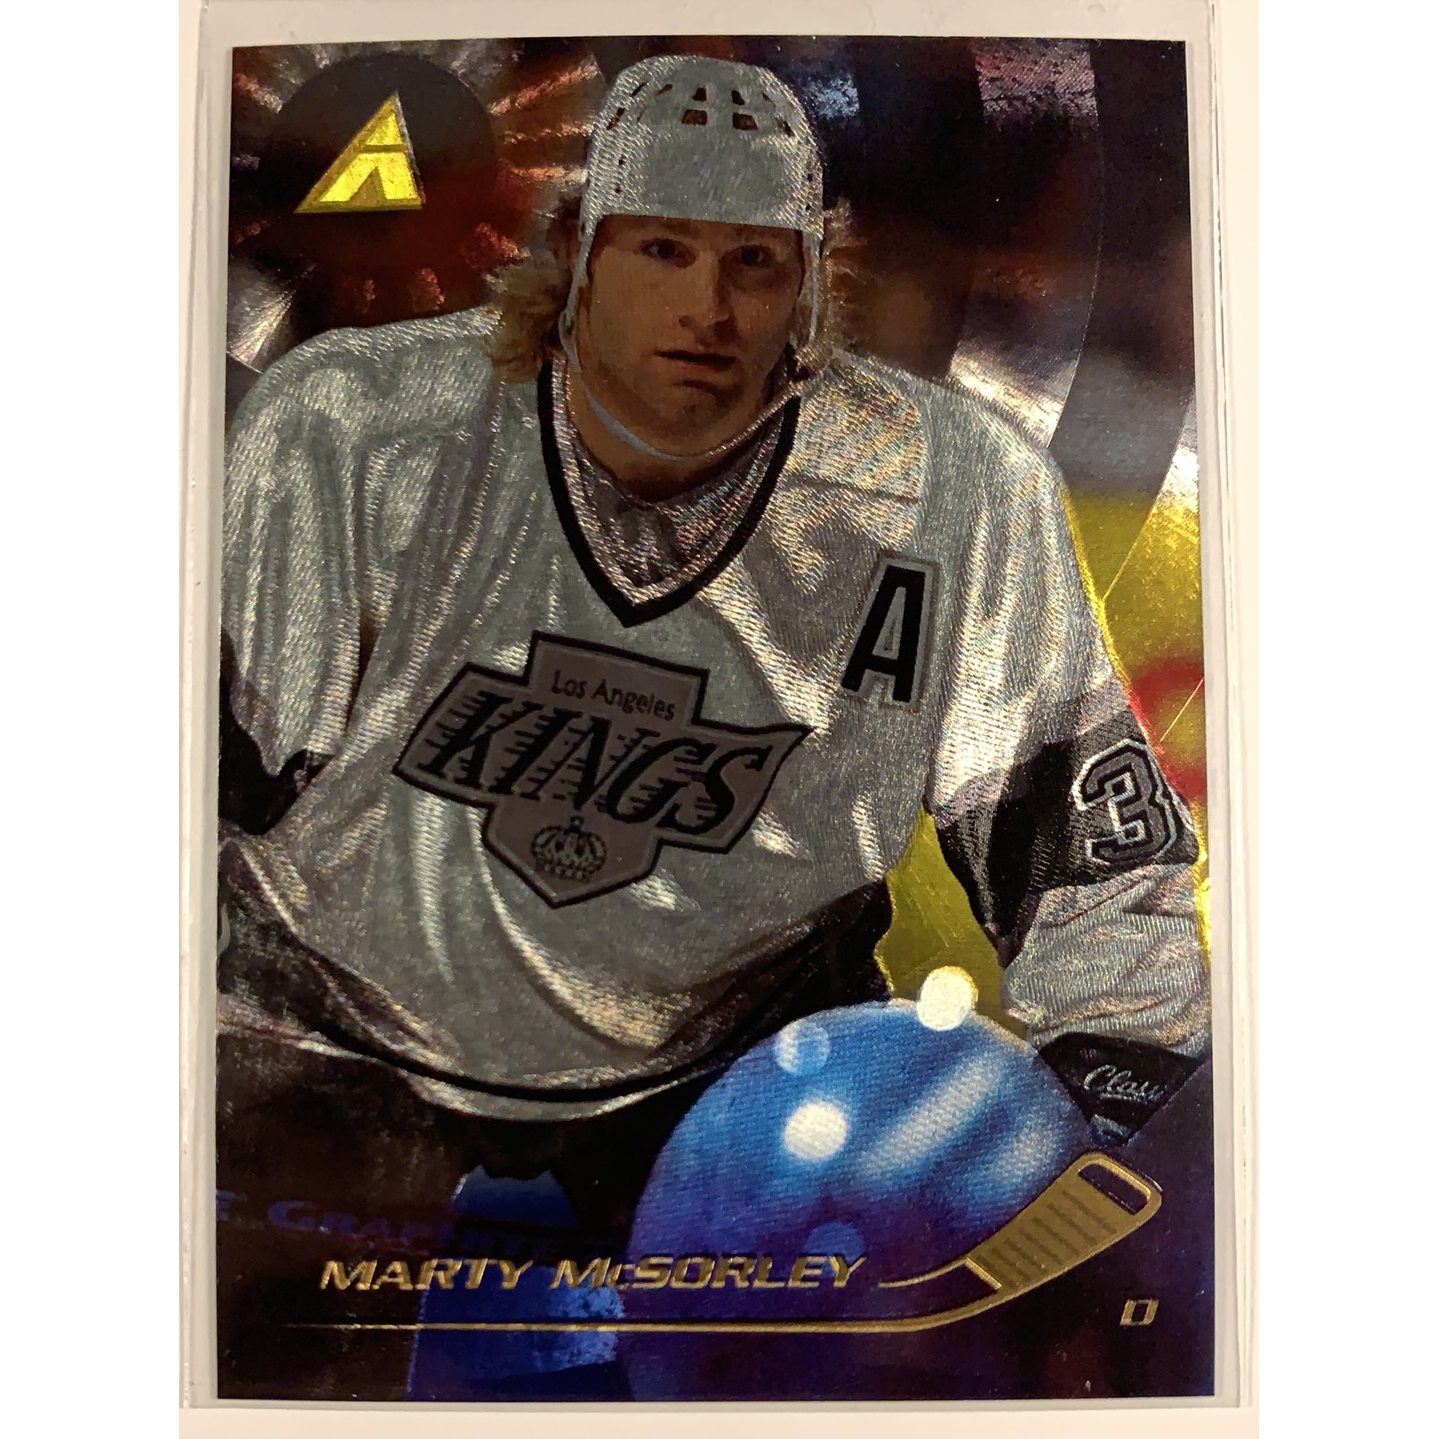  1995-96 Pinnacle Marty McSorley Rink Collection  Local Legends Cards & Collectibles